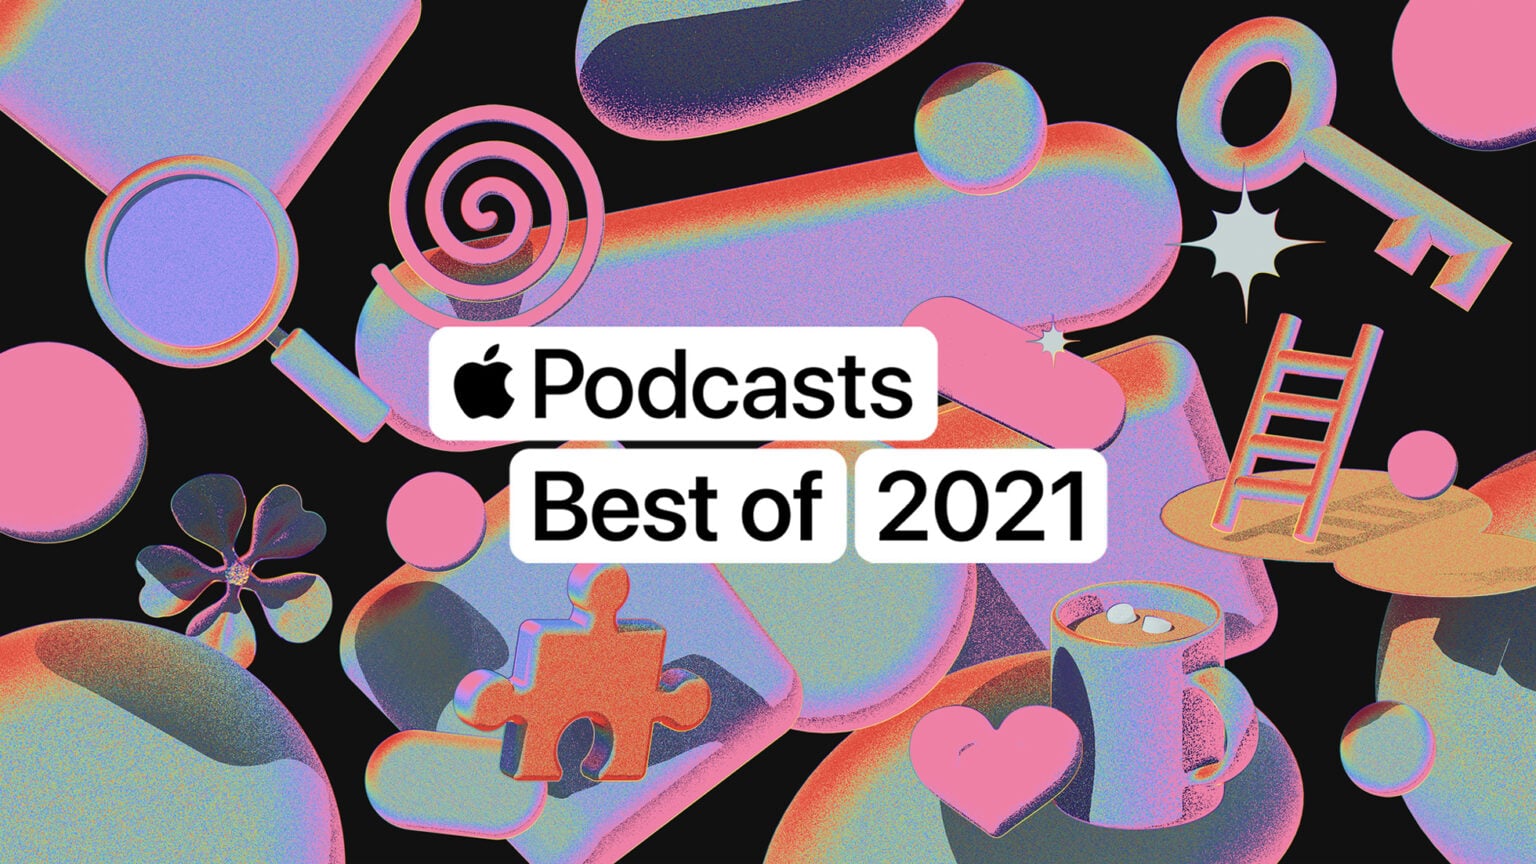 Apple's best podcasts of 2021